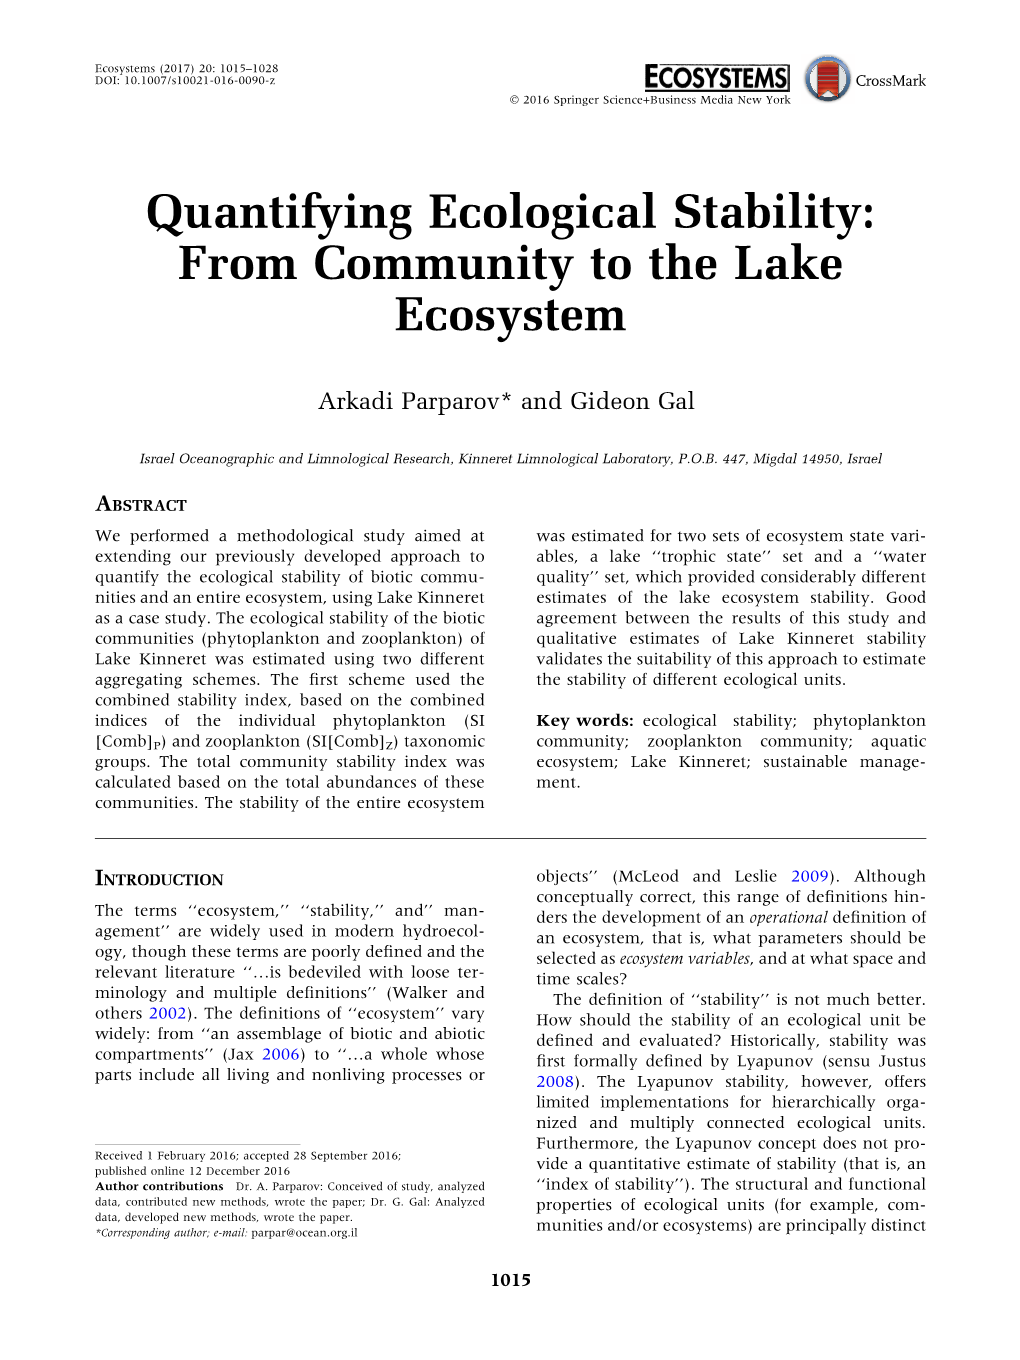 Quantifying Ecological Stability: from Community to the Lake Ecosystem